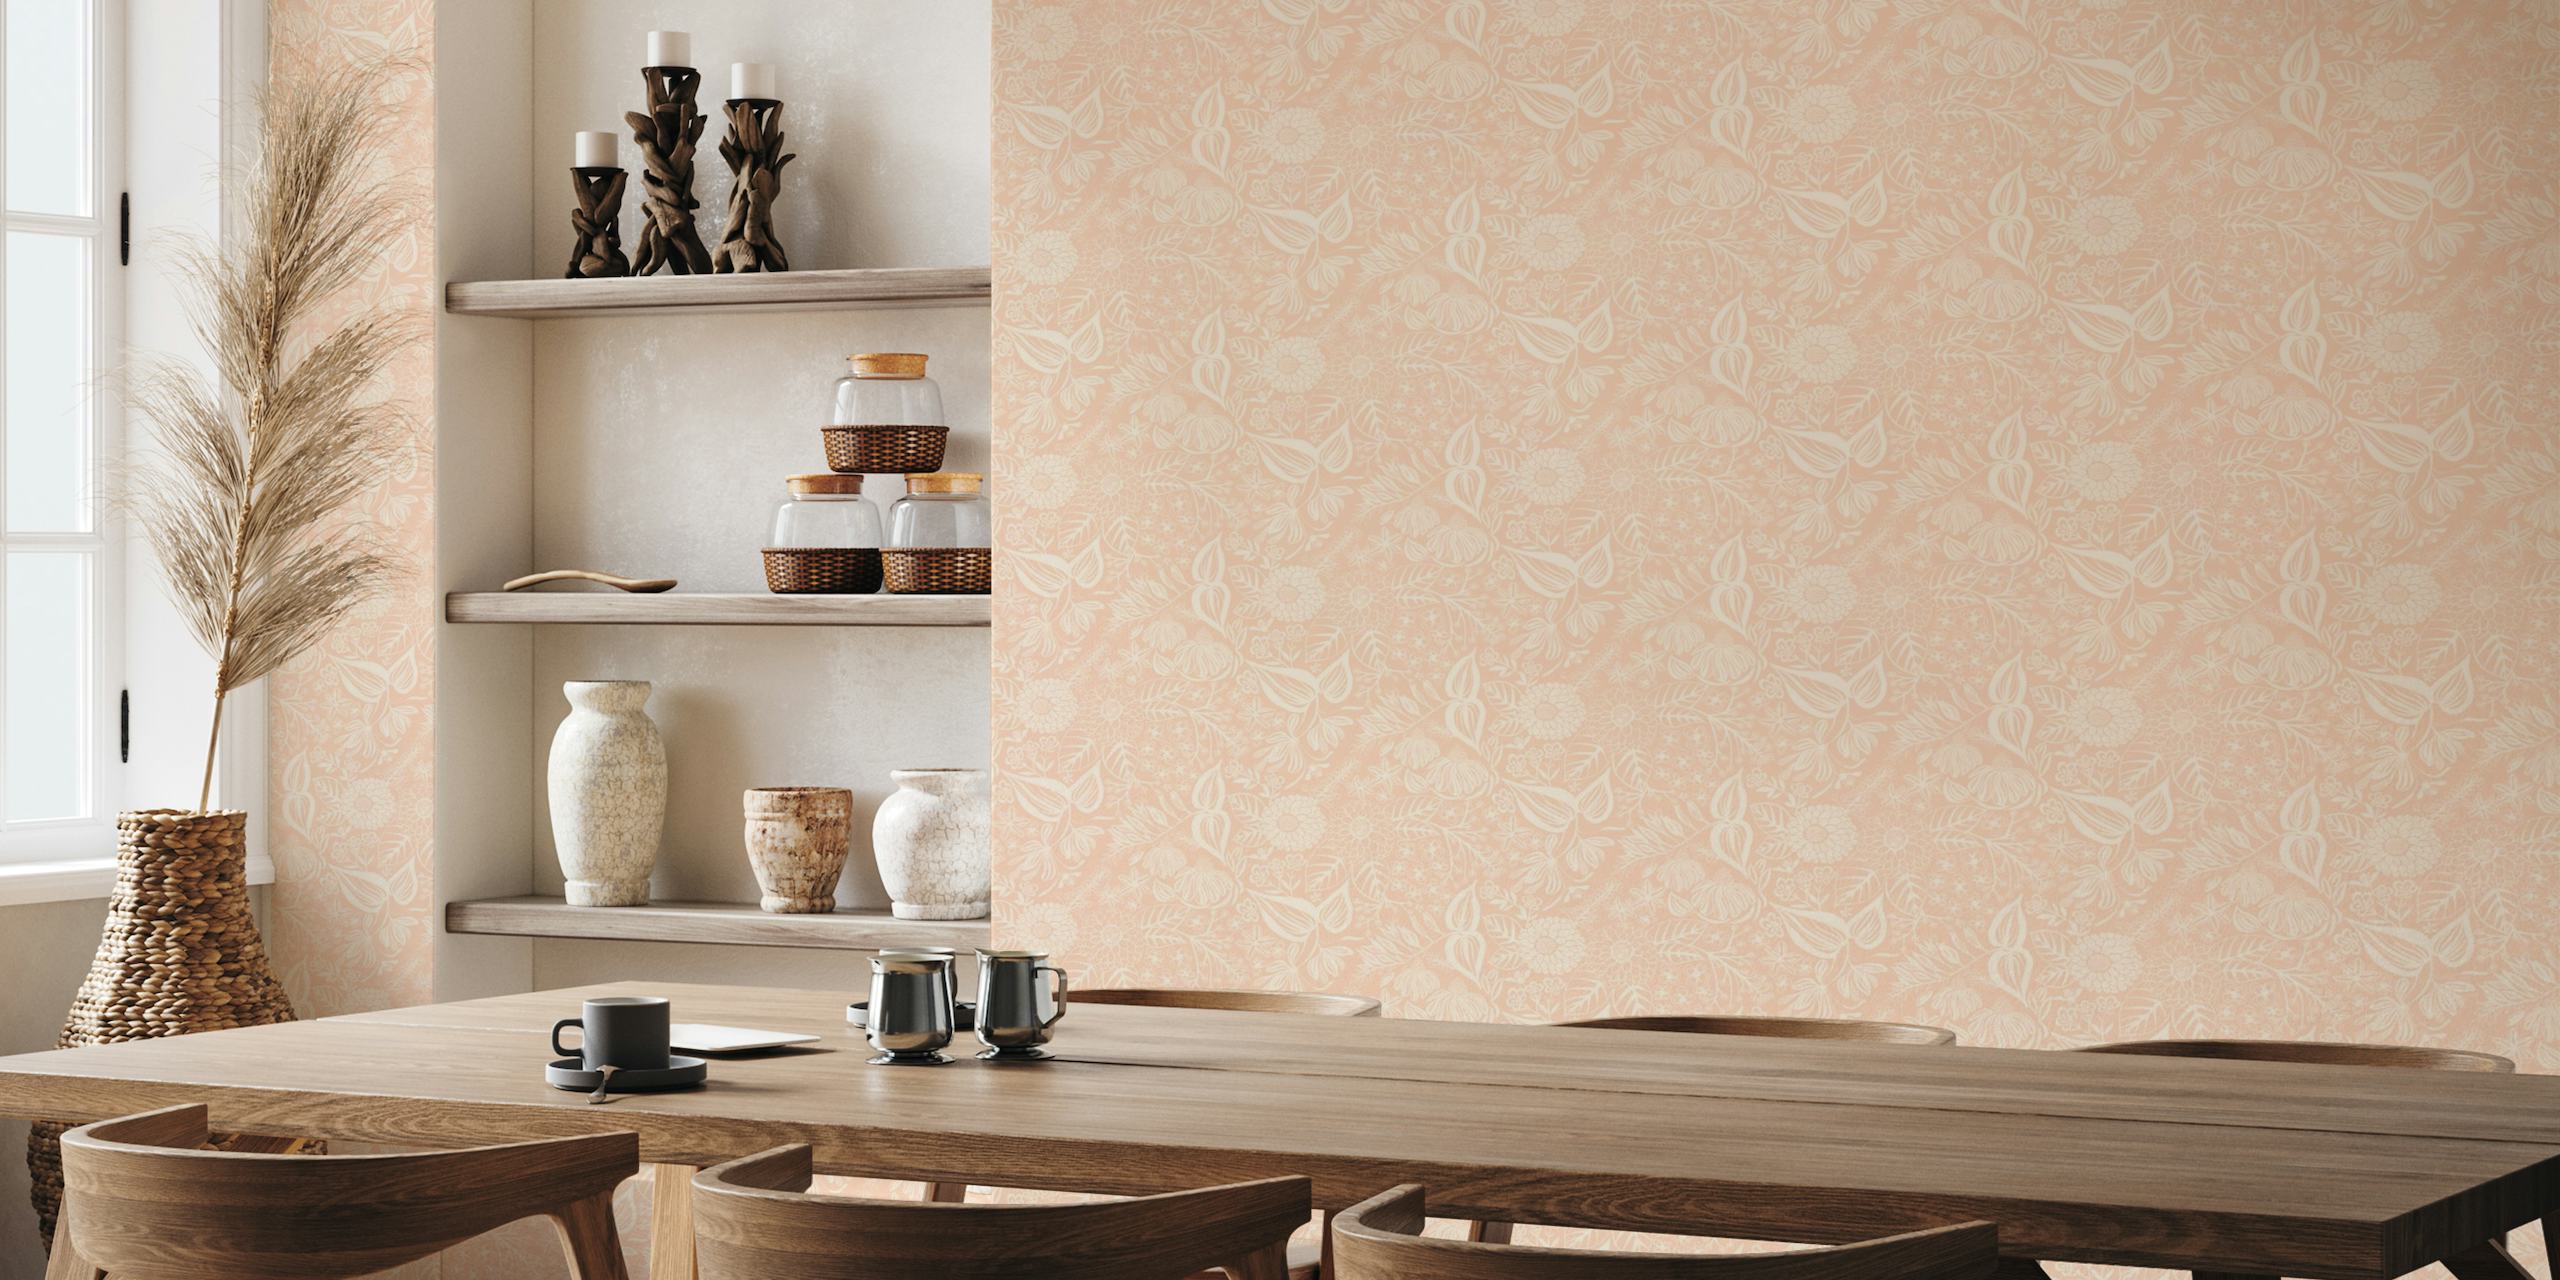 Subtle floral and bee pattern on a sheer peach wall mural